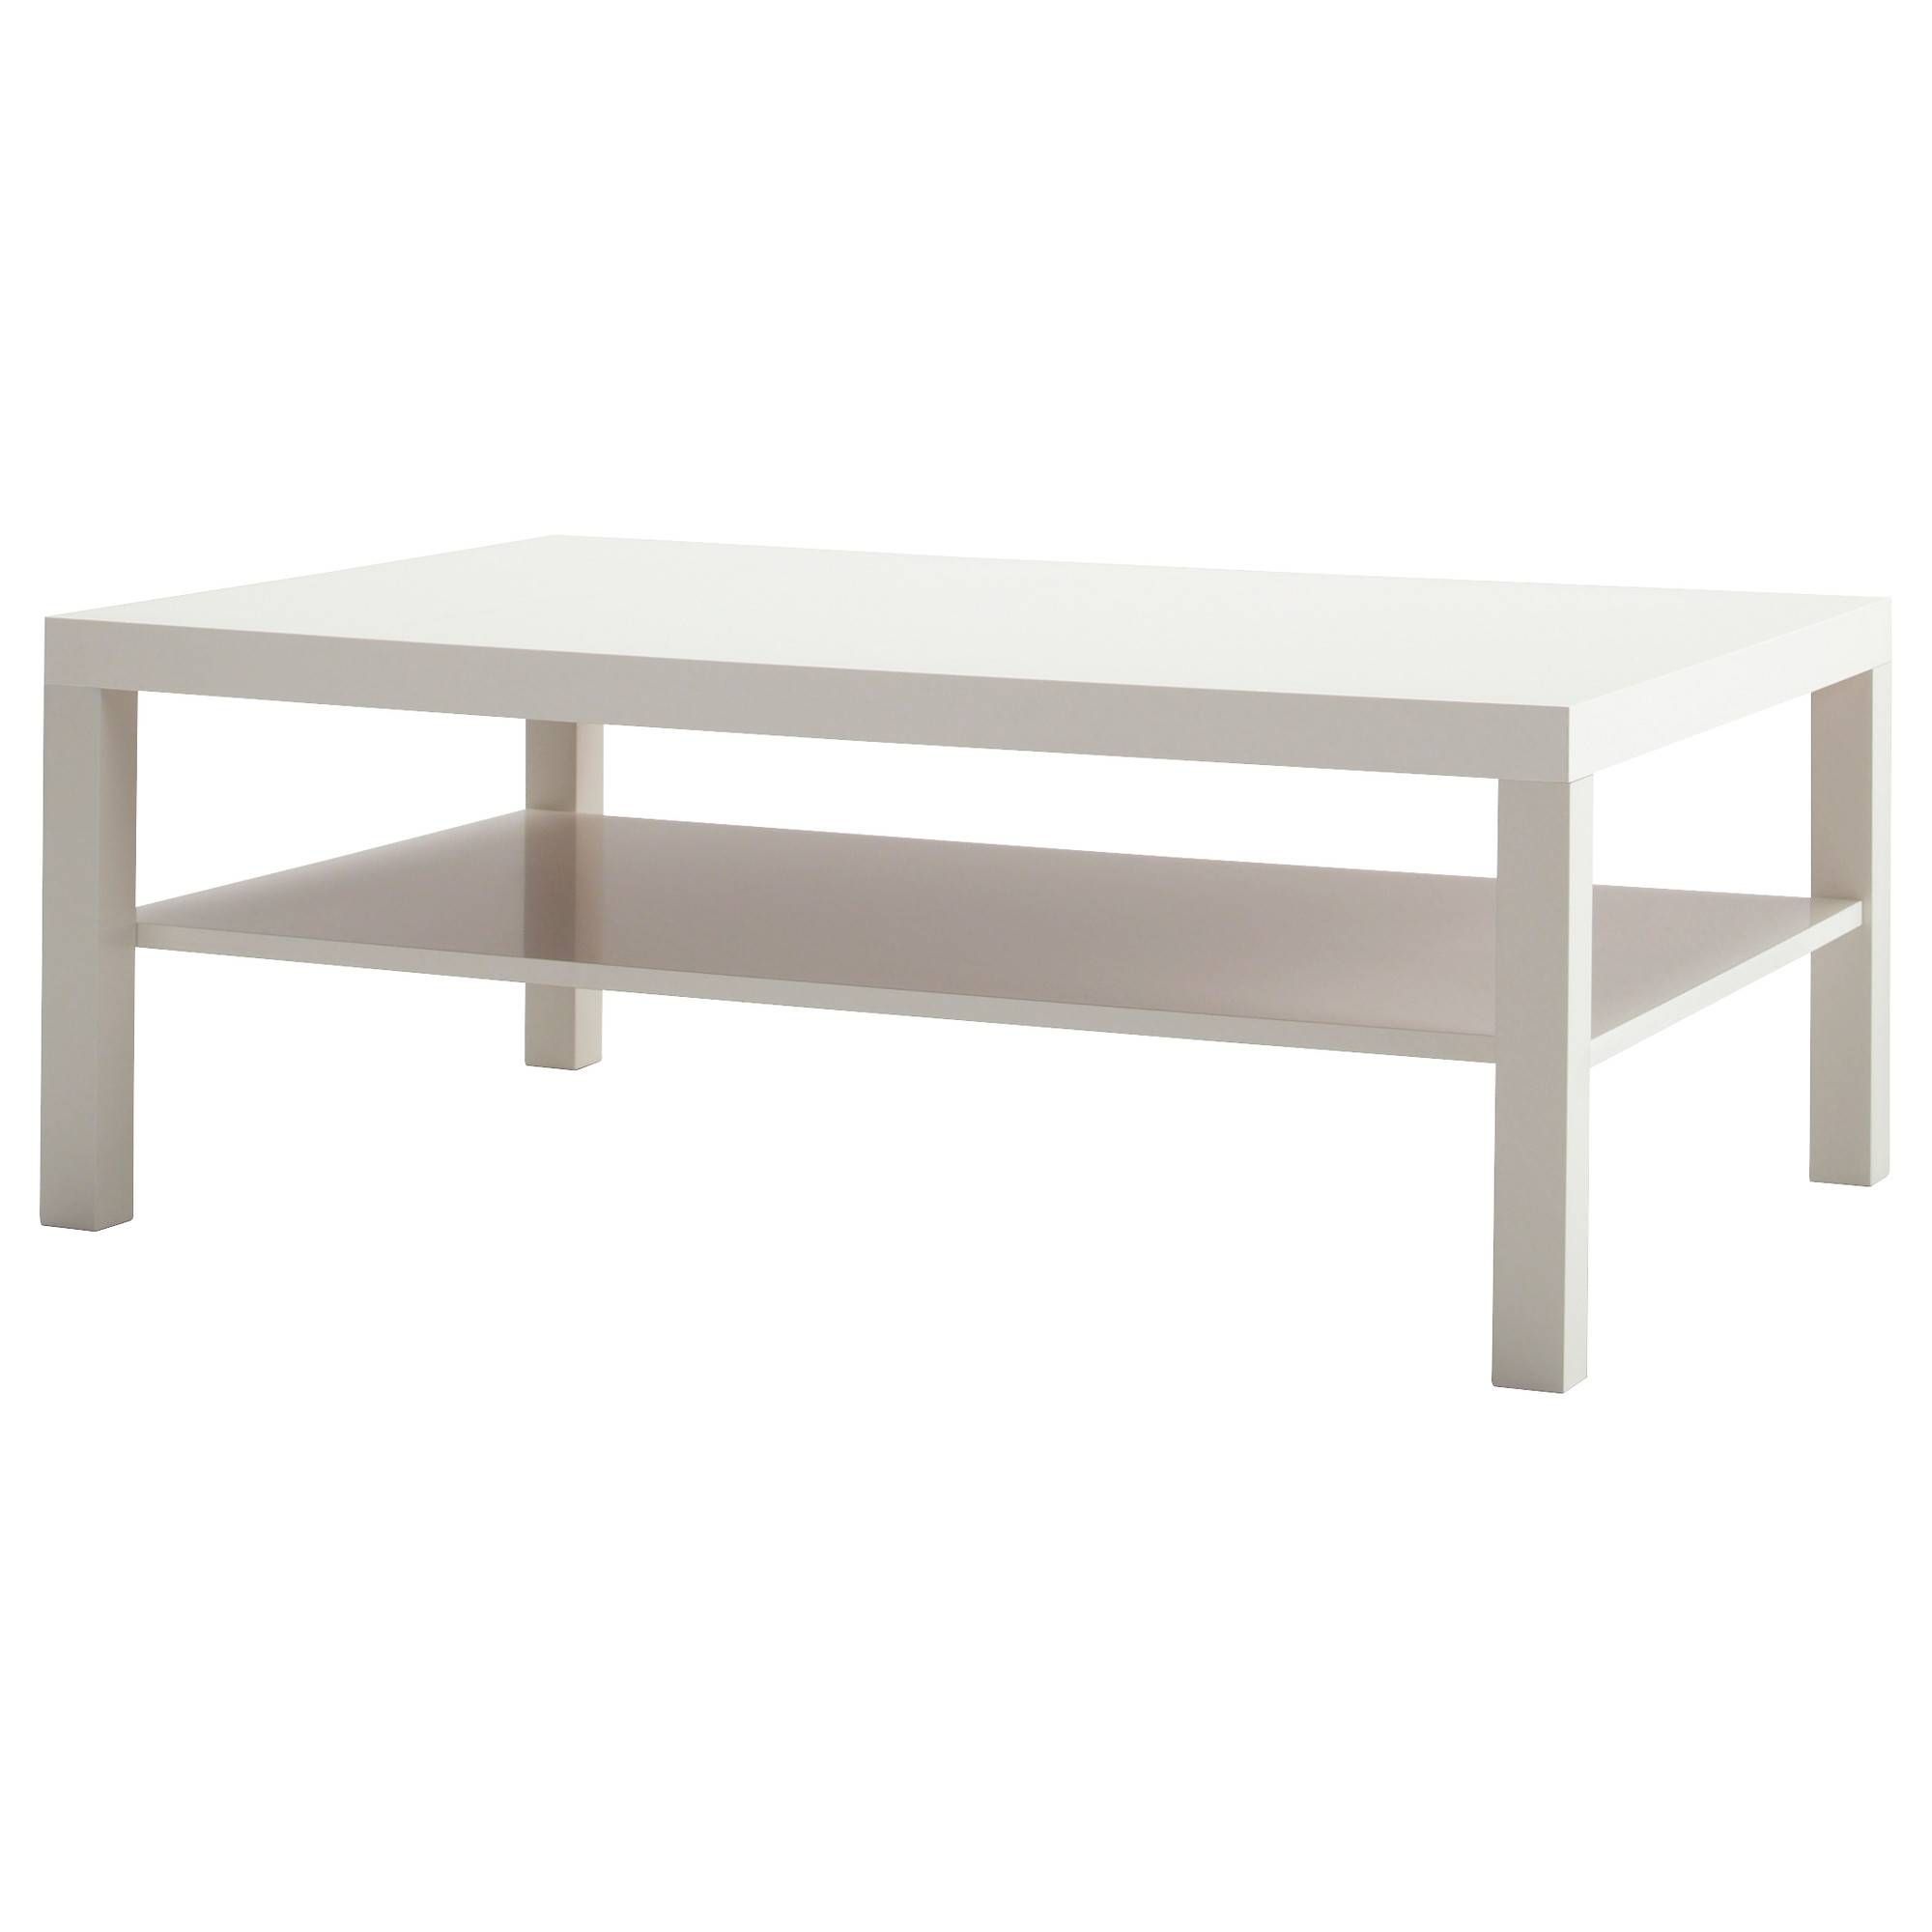 Coffee Tables & Console Tables – Ikea In White Coffee Tables With Baskets (View 23 of 30)